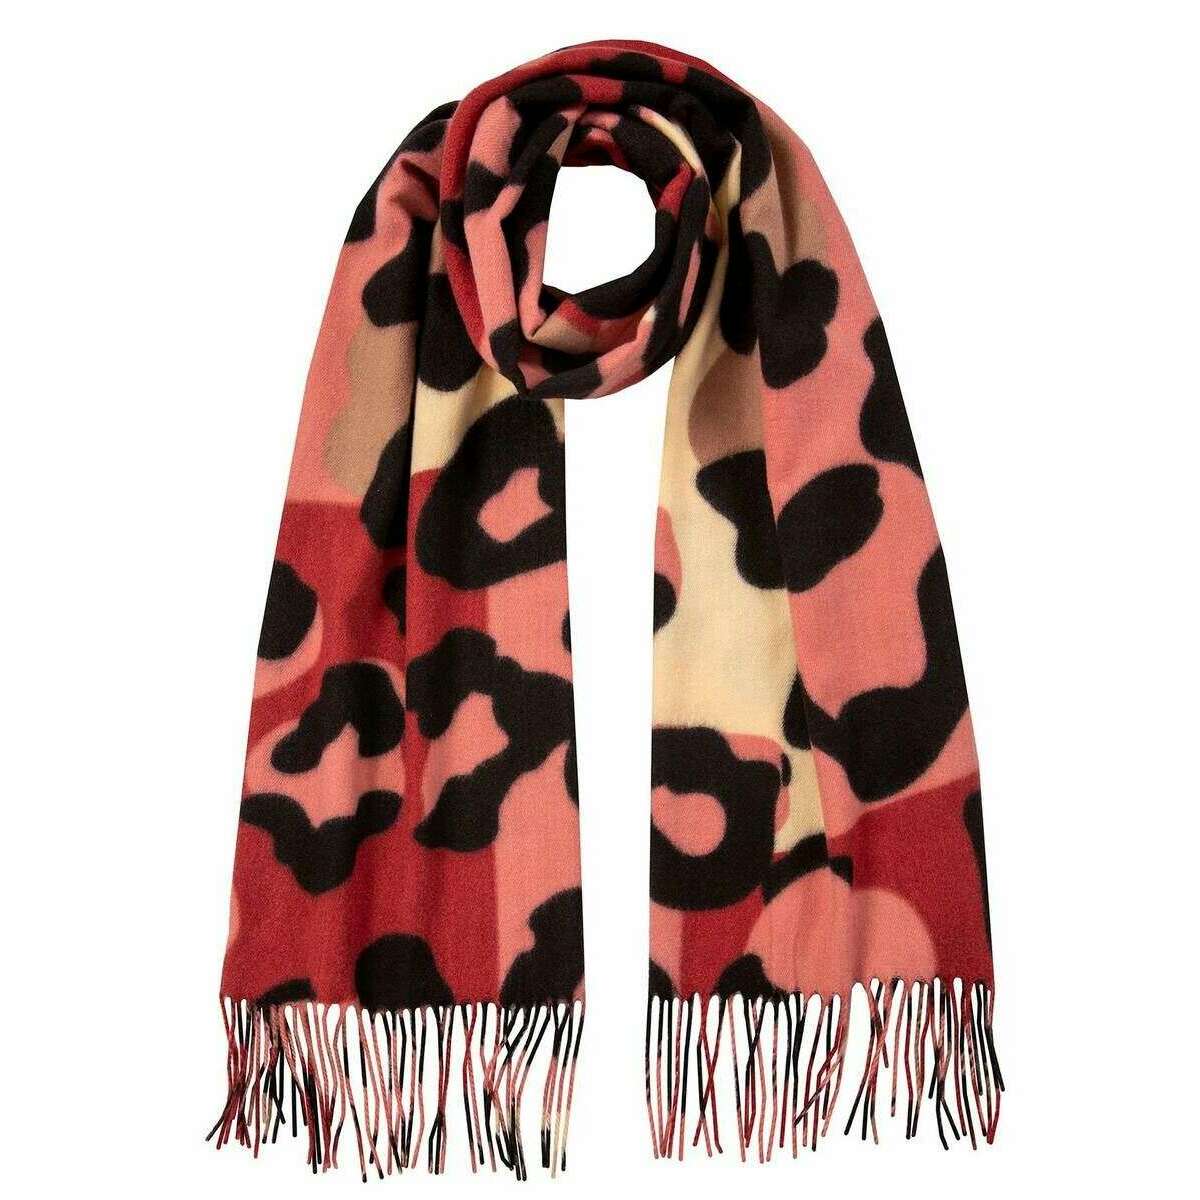 Dents Colourful Leopard Print Scarf - Berry Red/Black